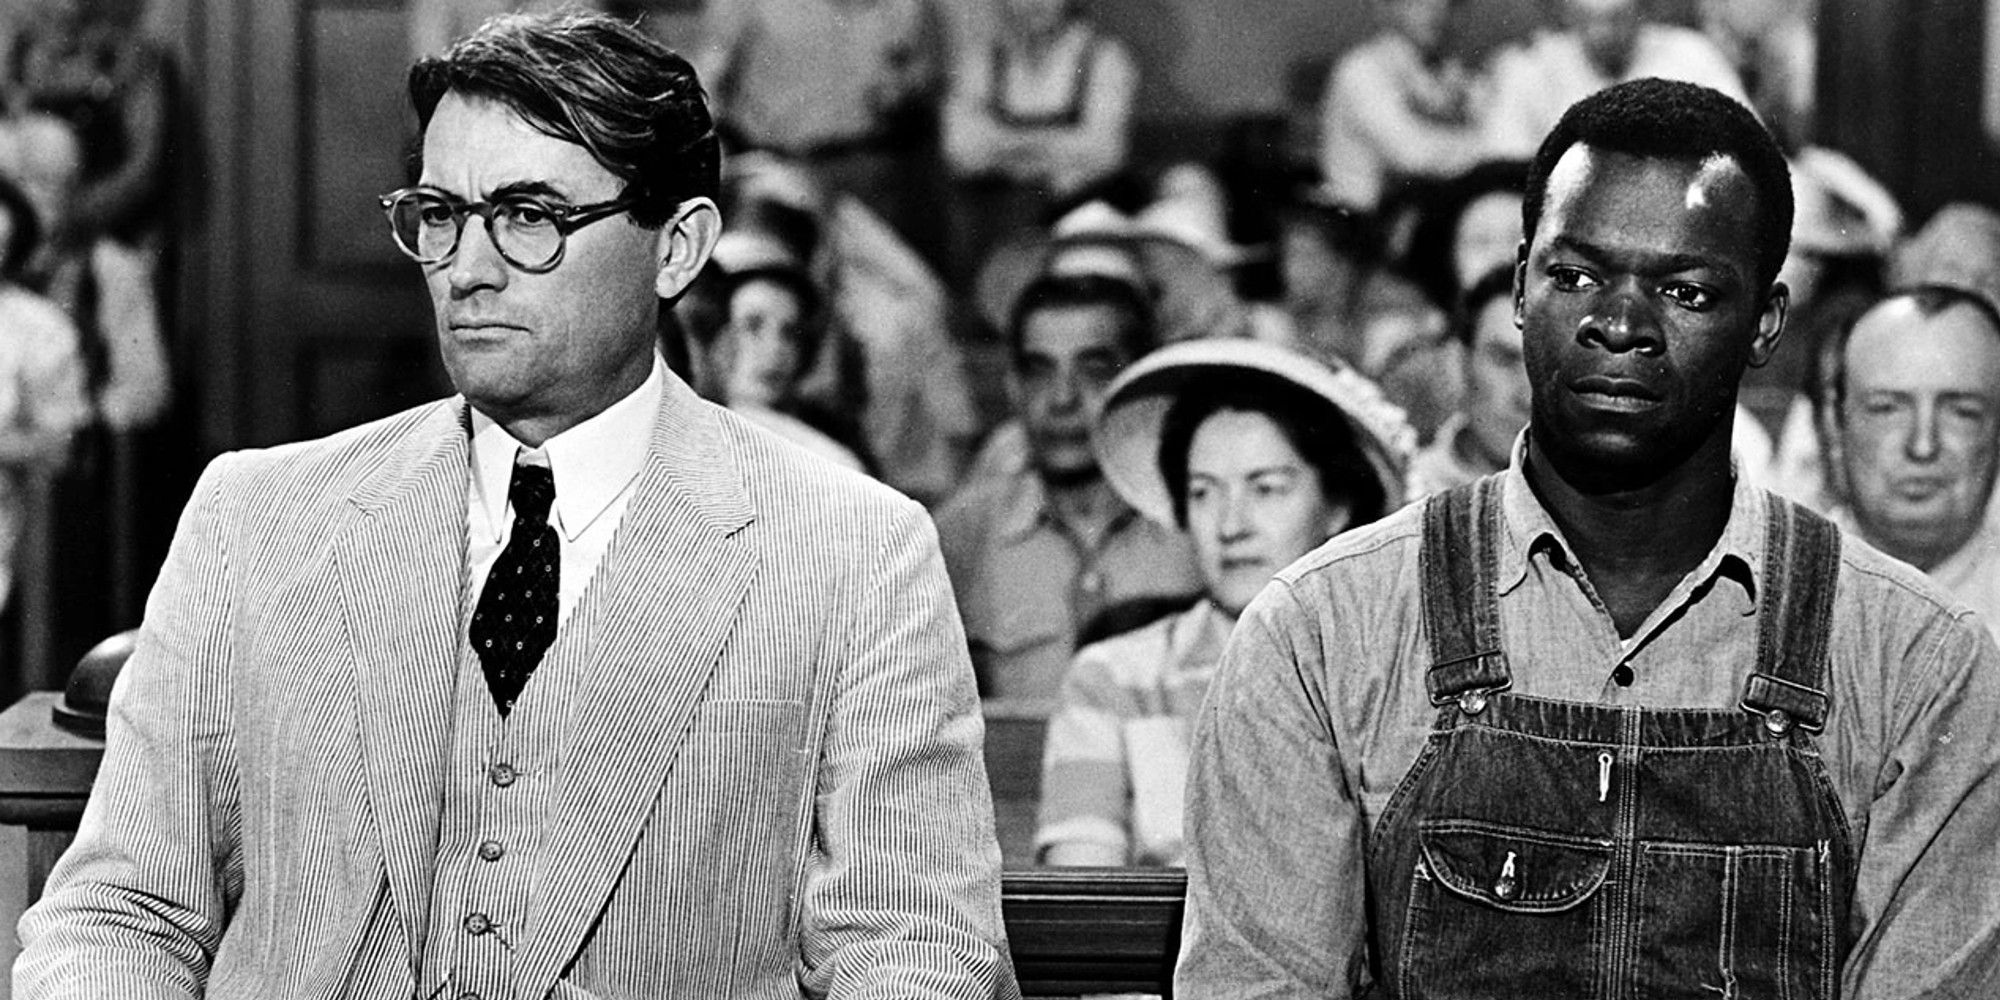 Gregory Peck and Brock Peters as Atticus Finch and Tom Robinson in 'To Kill a Mockingbird'